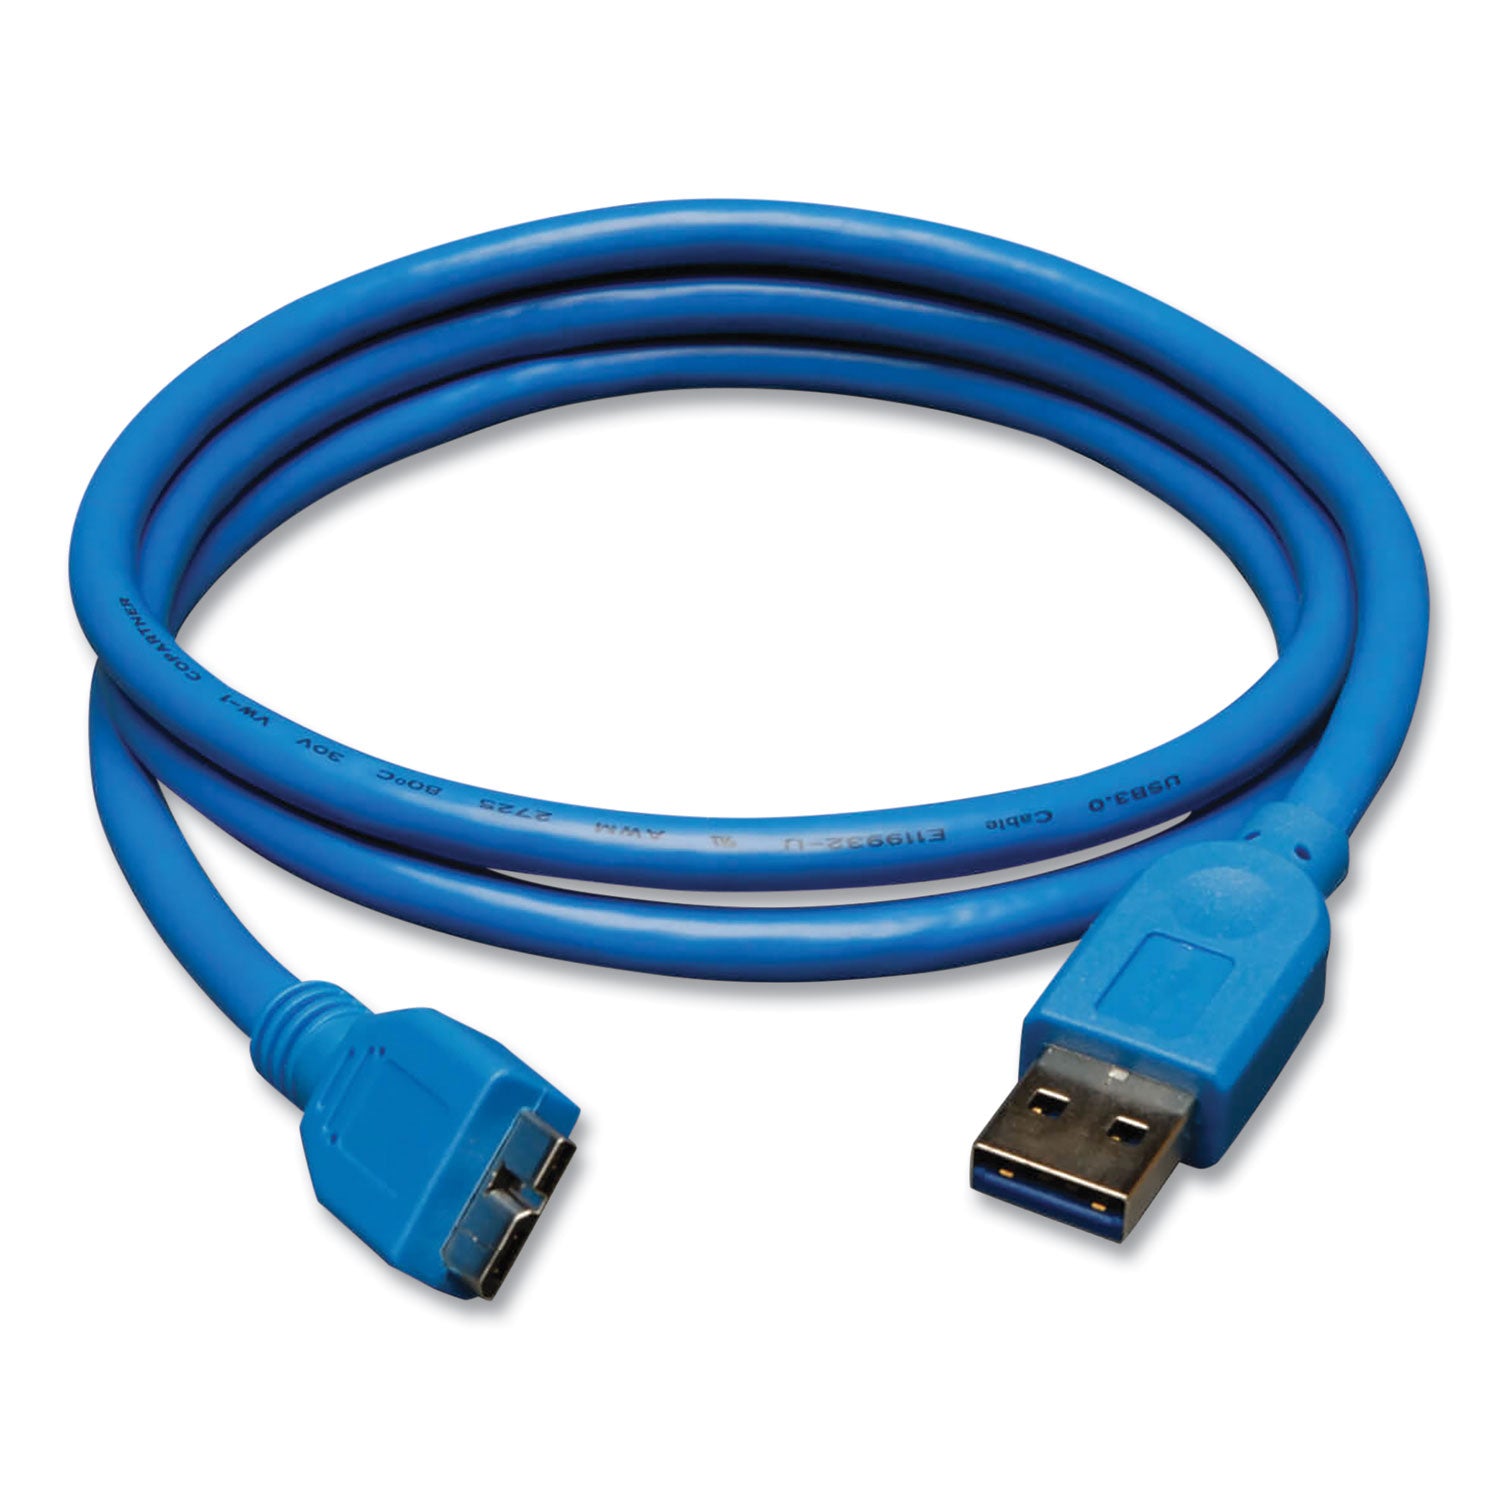 USB 3.0 SuperSpeed Device Cable, 3 ft, Blue - 